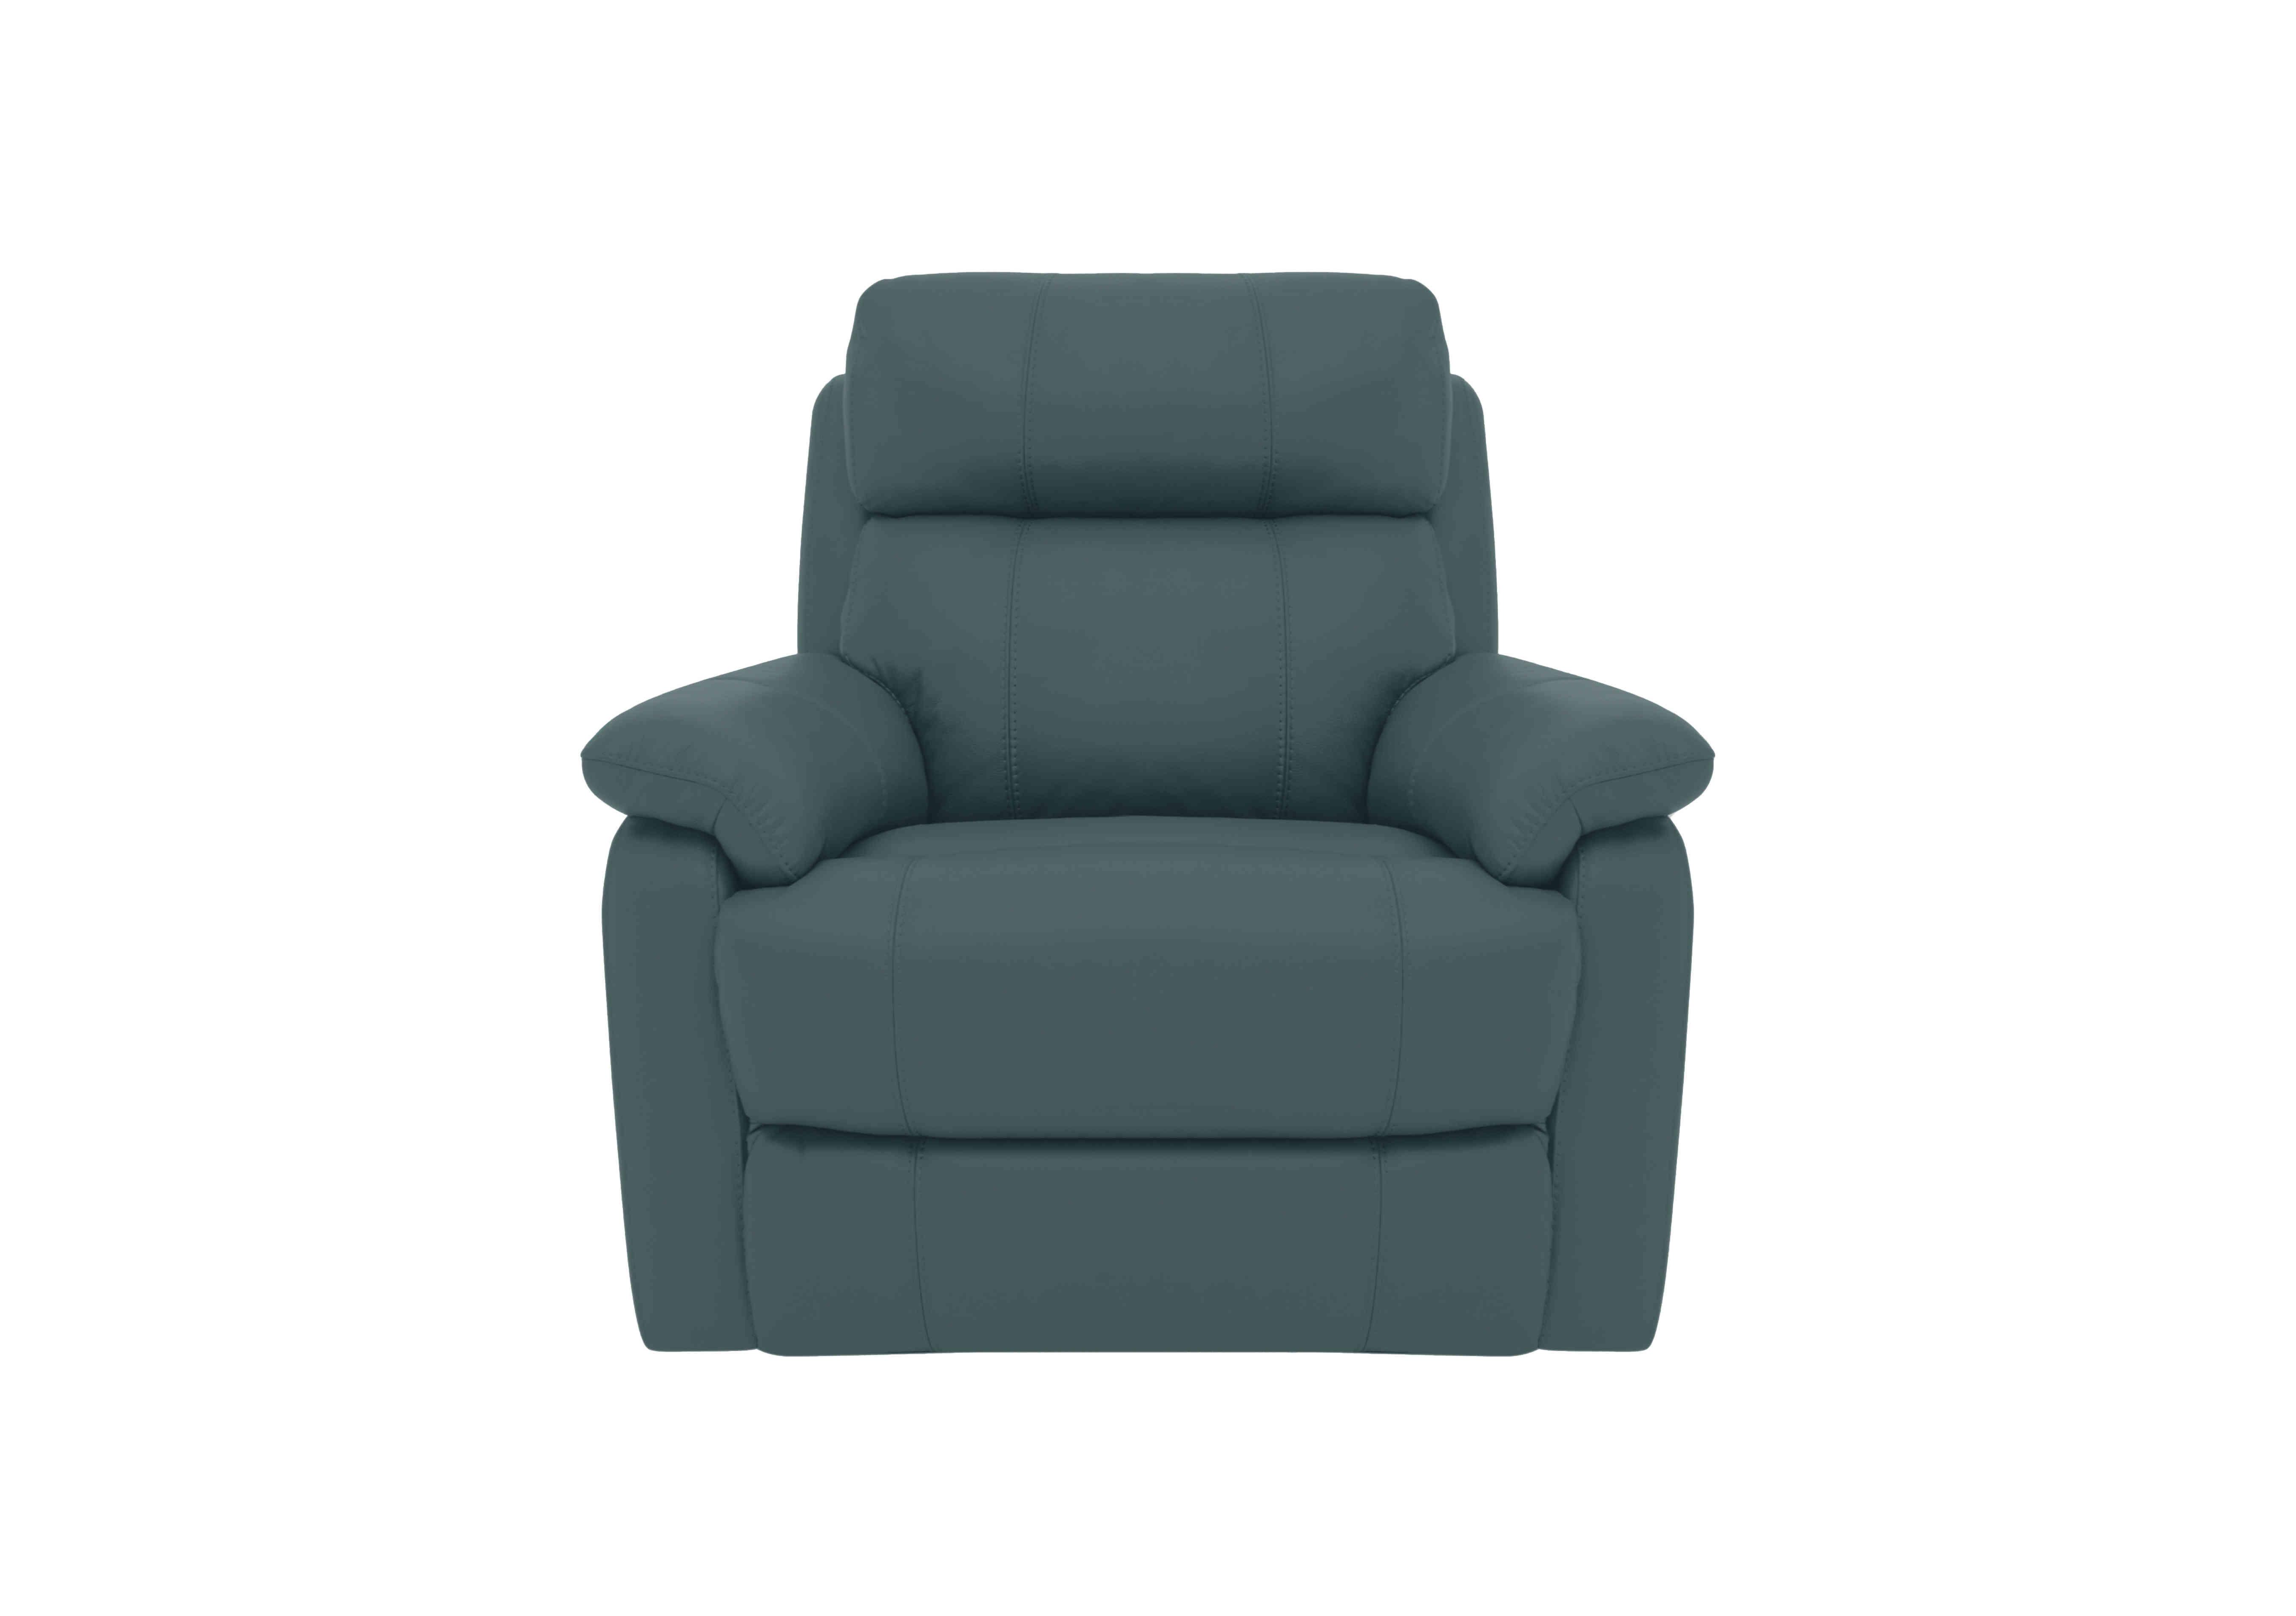 Relax Station Komodo Leather Power Armchair in Bv-301e Lake Green on Furniture Village